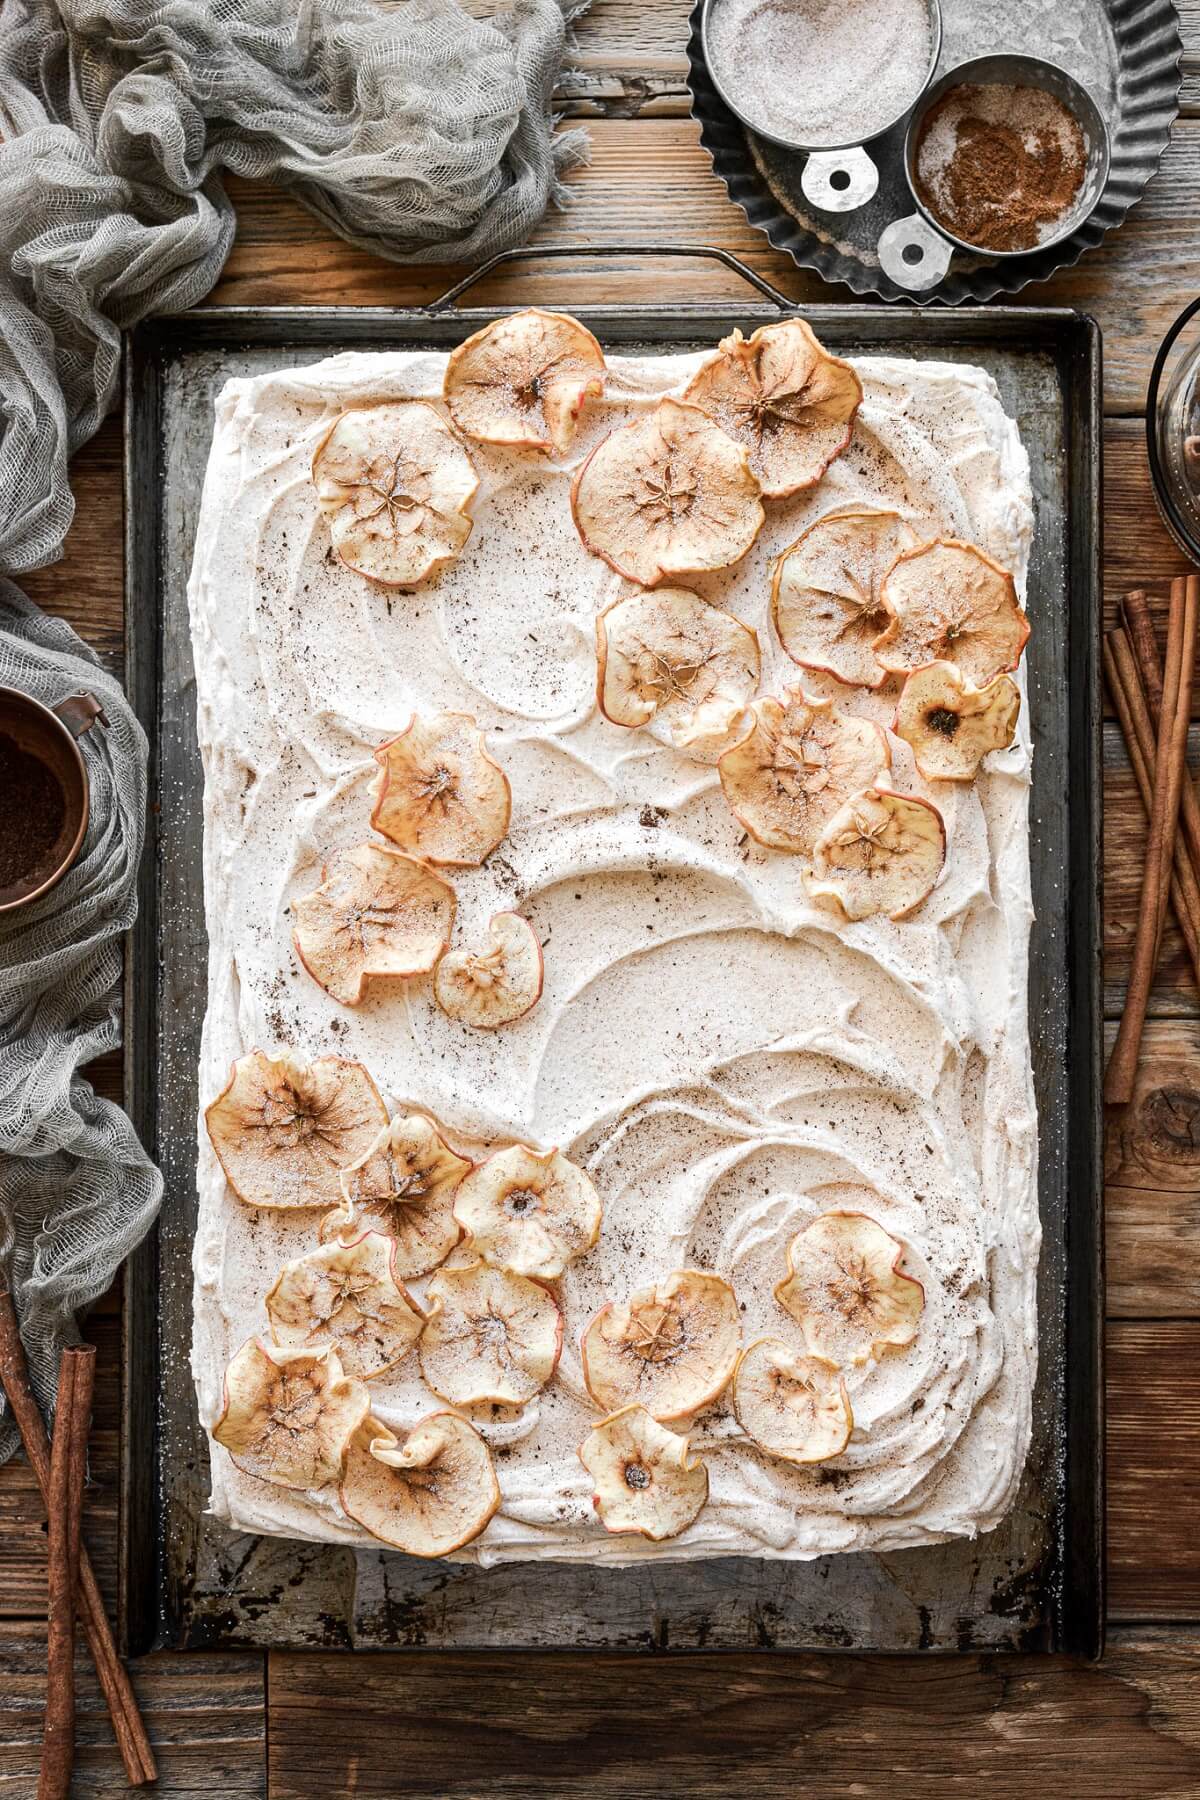 Cinnamon apple cider sheet cake decorated with dried apple slices.